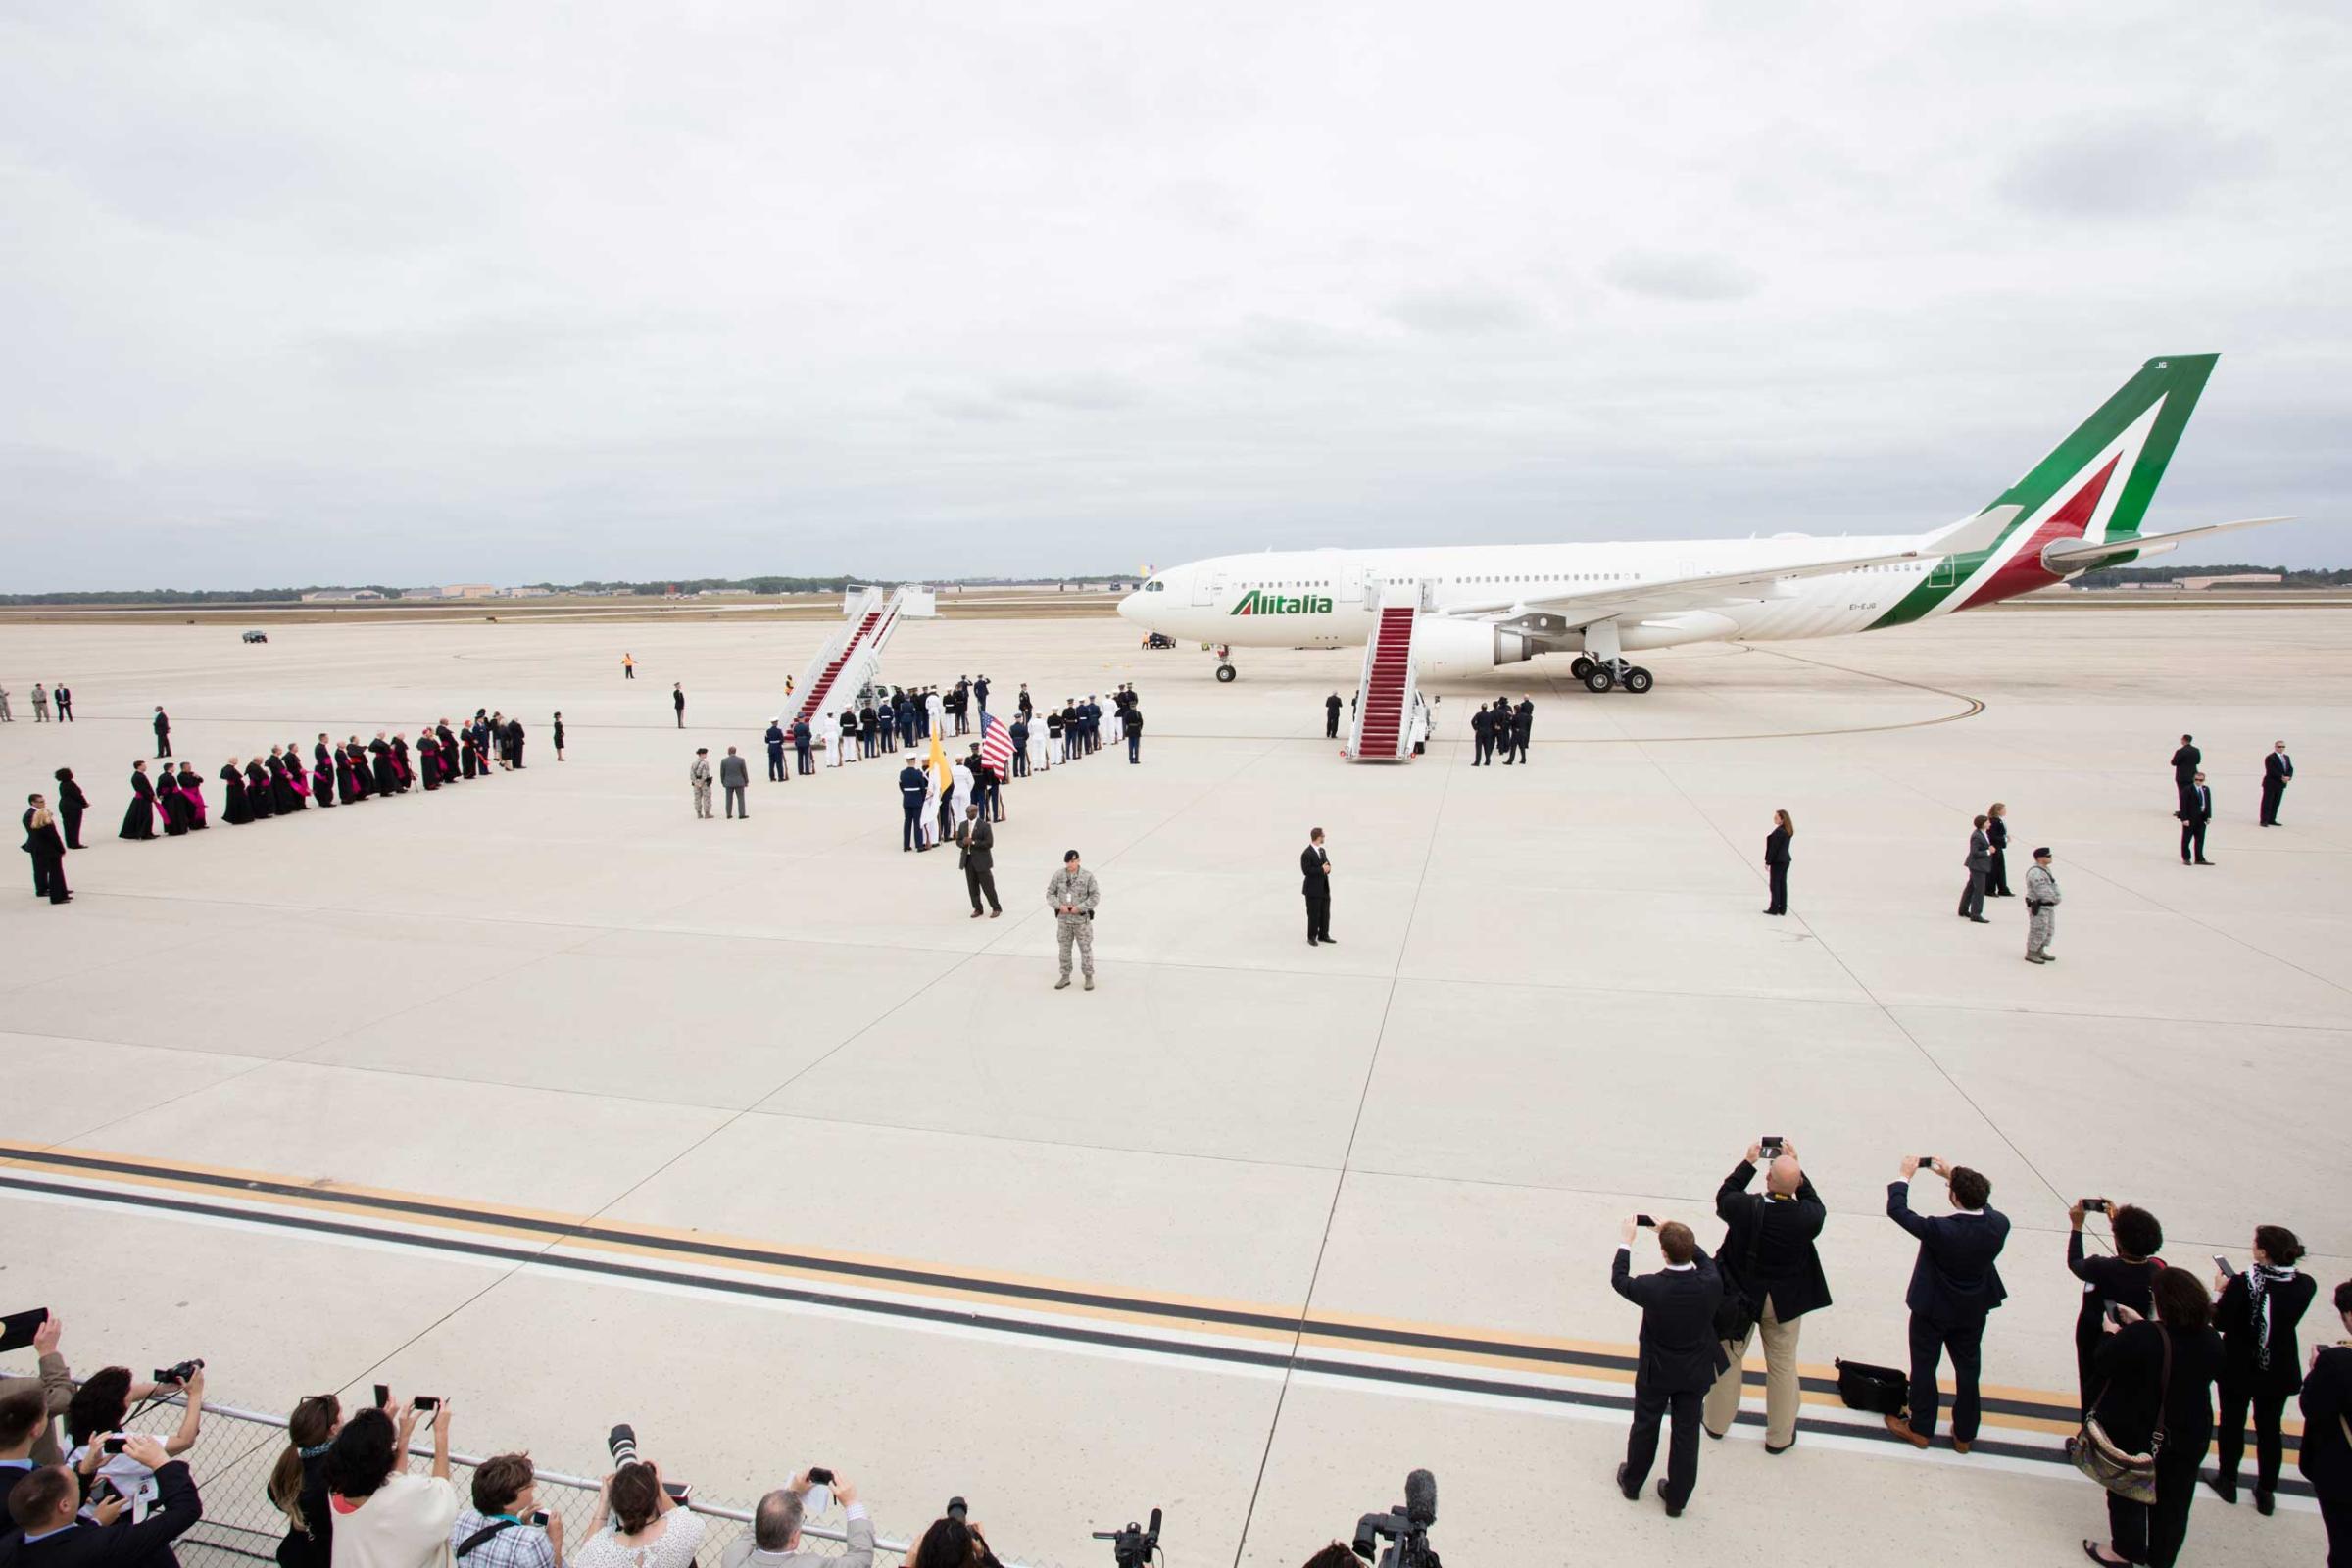 The arrival of Pope Francis at Joint Base Andrews, Md. Sept. 22, 2015